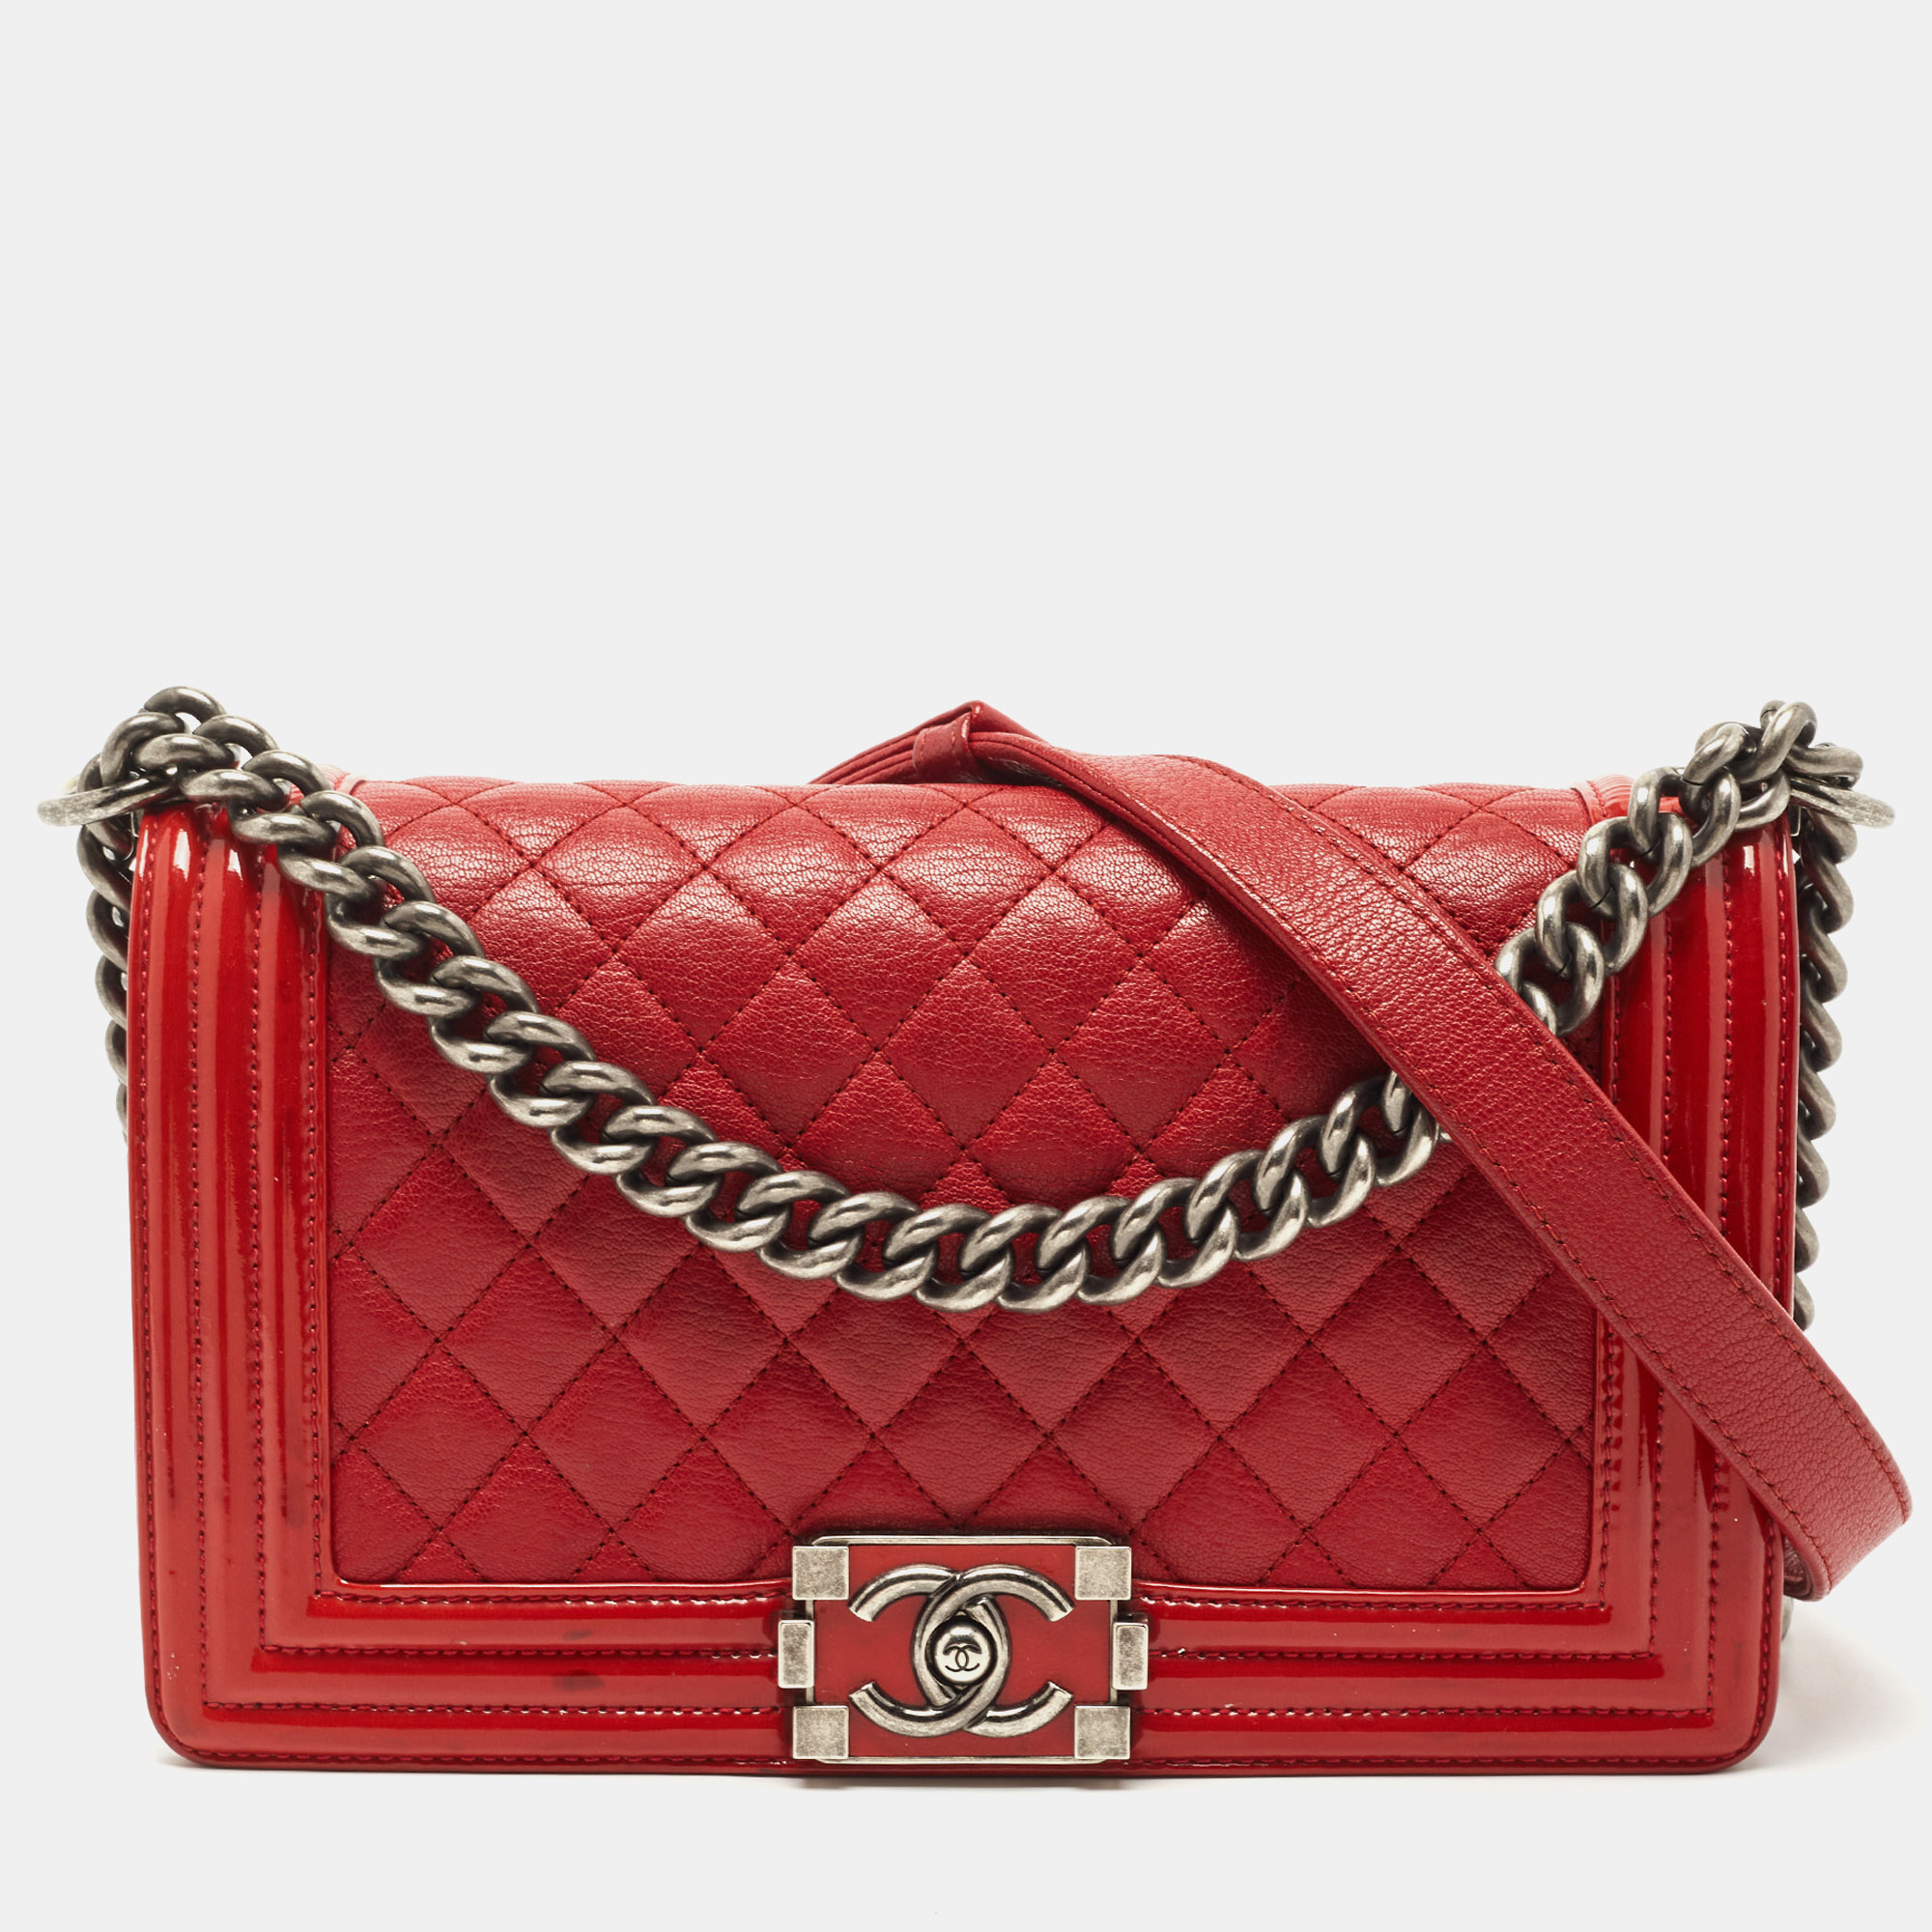 Chanel red quilted leather and patent medium boy flap bag